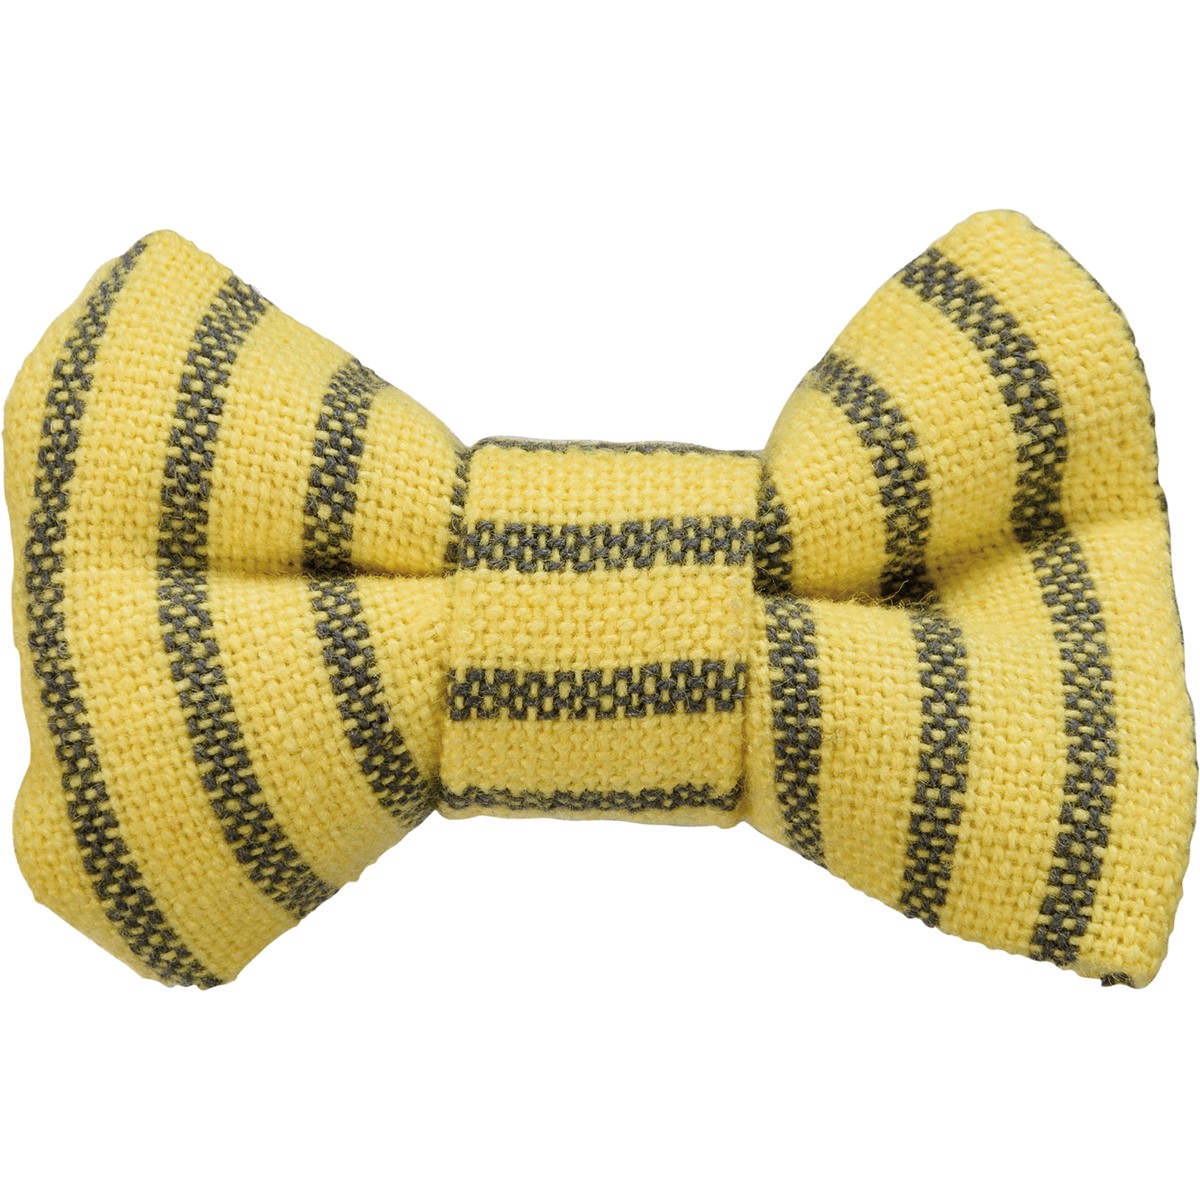 Plaid And Dots Small Pet Bow Tie Set - Cotton, Hook-and-Loop Fastener